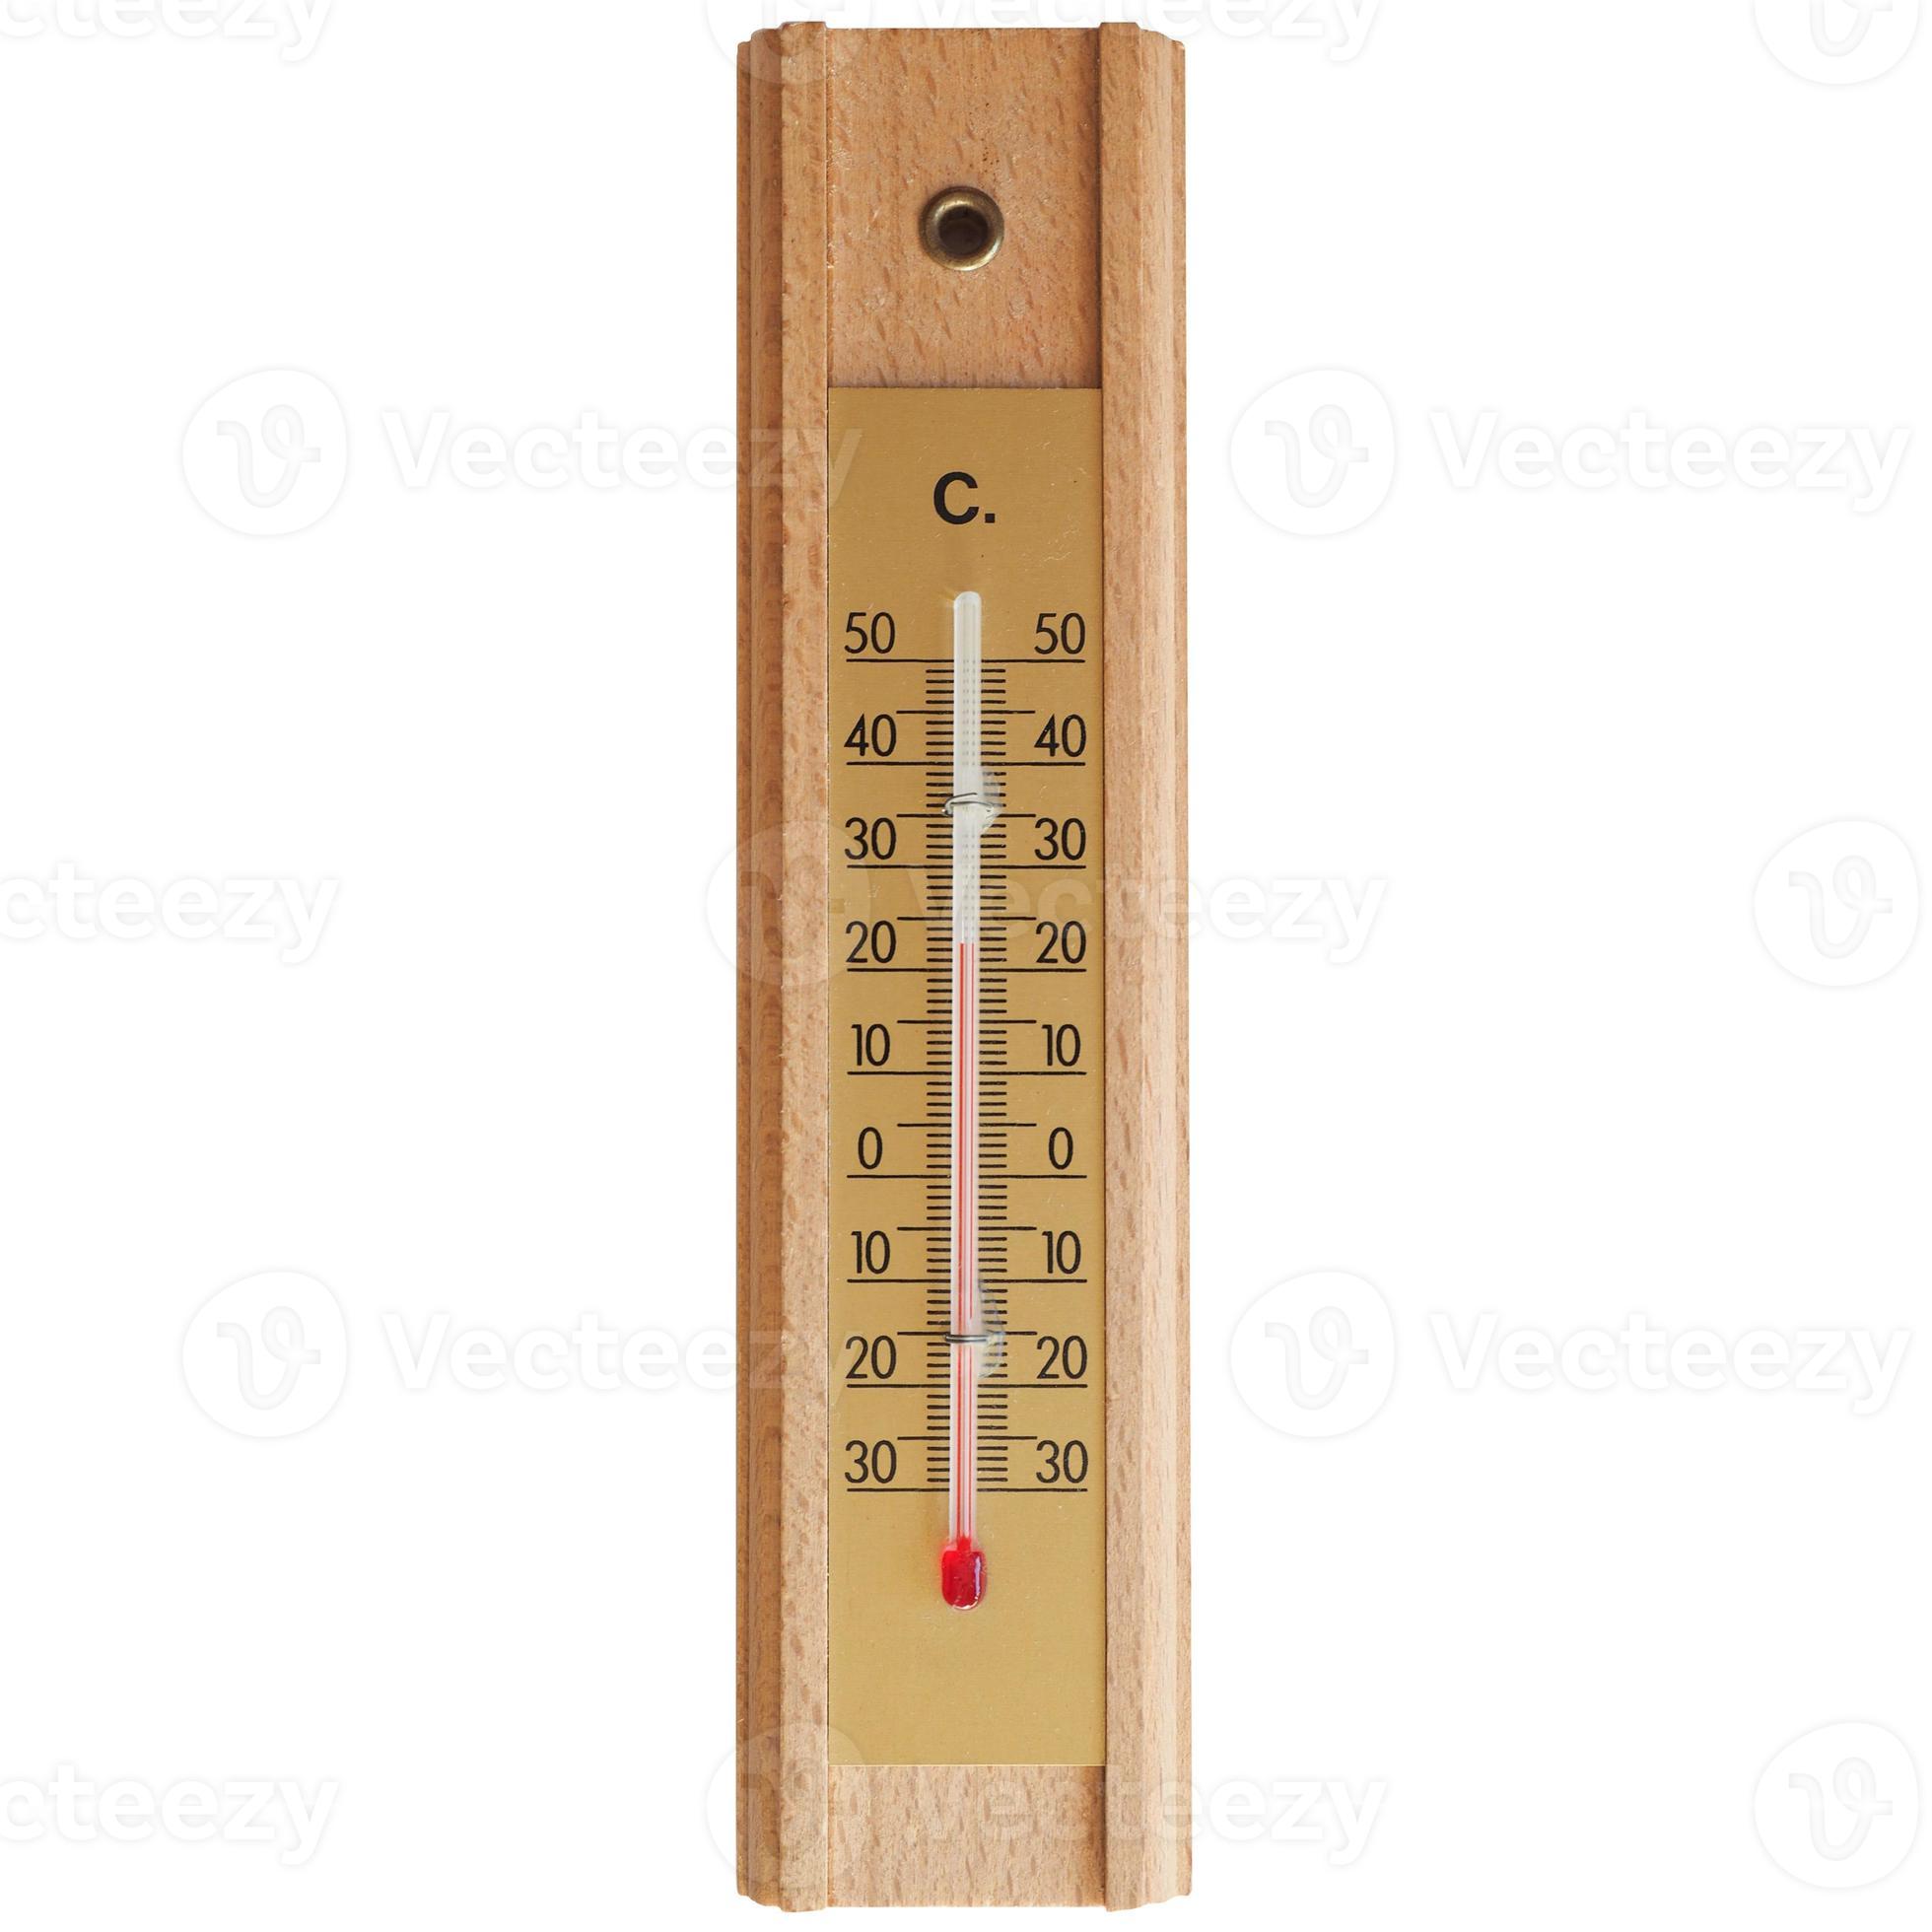 https://static.vecteezy.com/system/resources/previews/003/119/380/large_2x/thermometer-for-air-temperature-measurement-photo.jpg